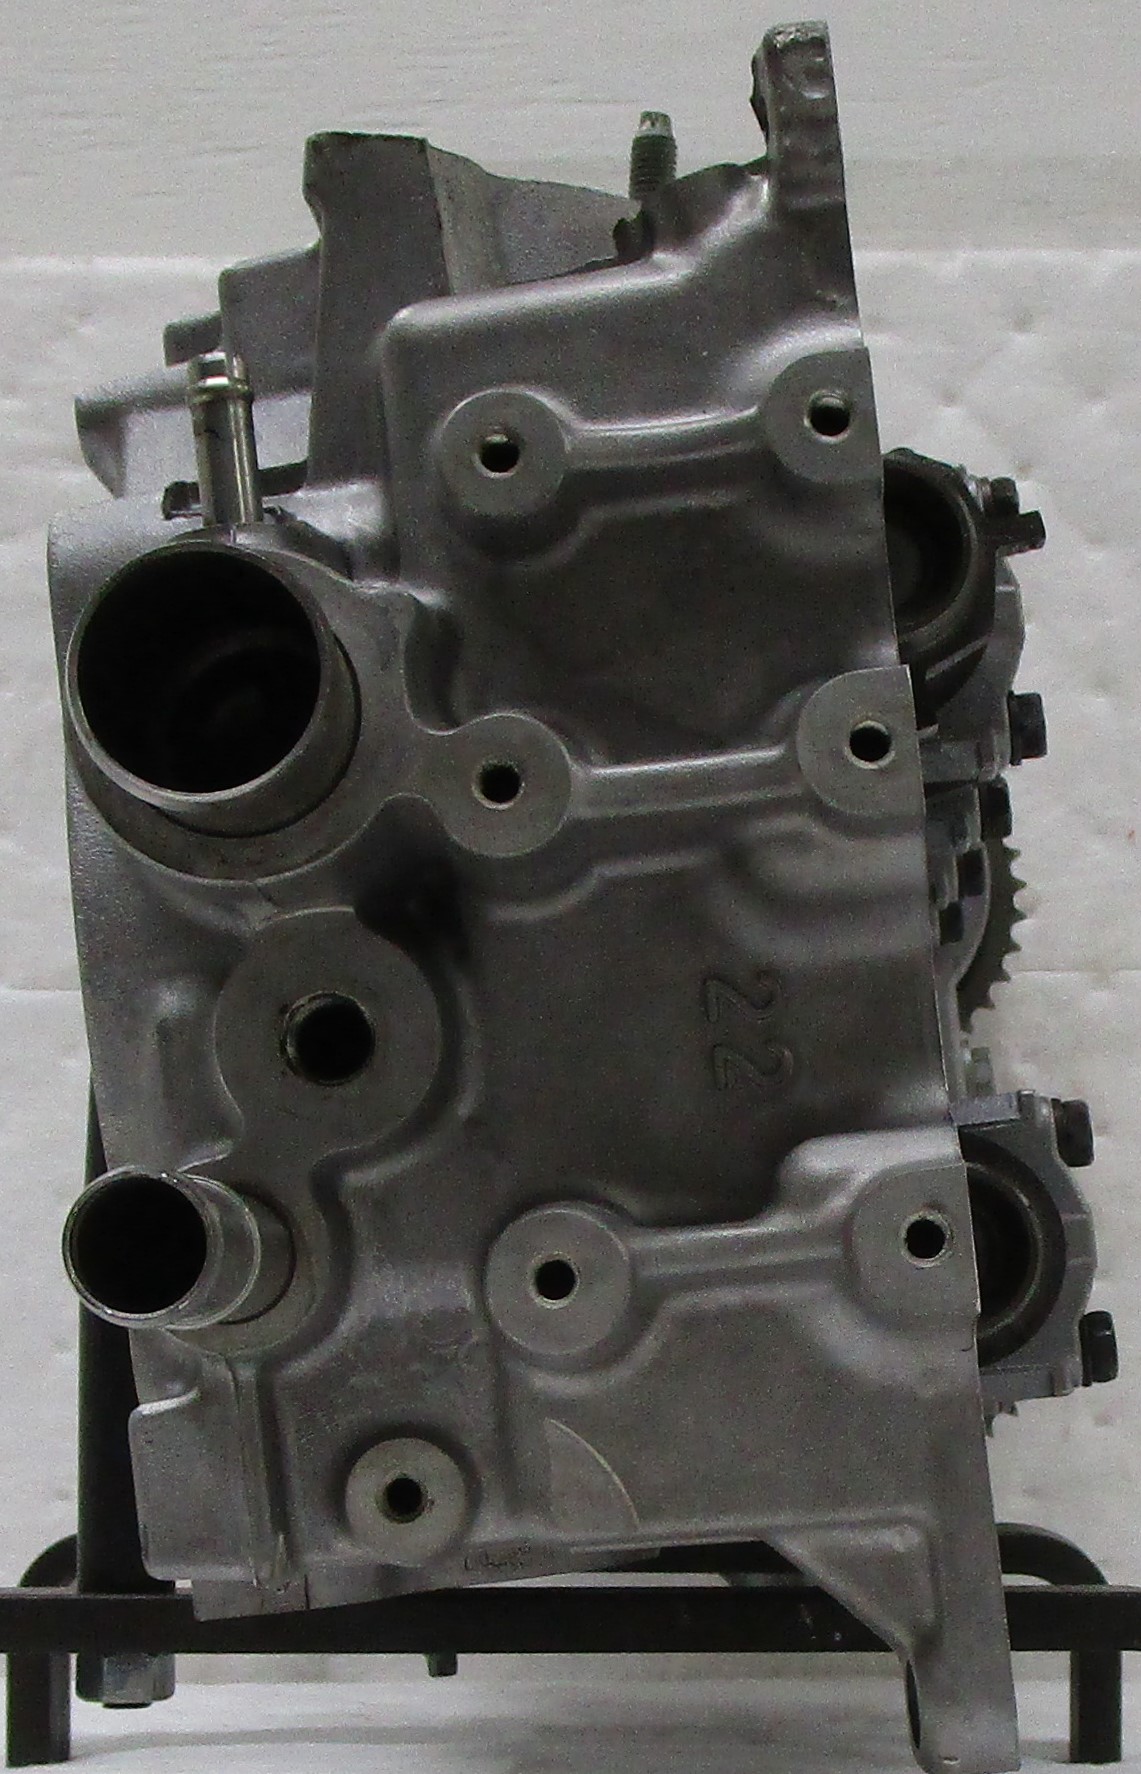 1999-2008 Toyota Celica, Corolla, MR2 Spyder, Matrix, L4 1.8L / 1794, DOHC 16 Valve, (1ZZFE) Reonditioned Cylinder Head W/Cams (In Line) $100. Core Charge.